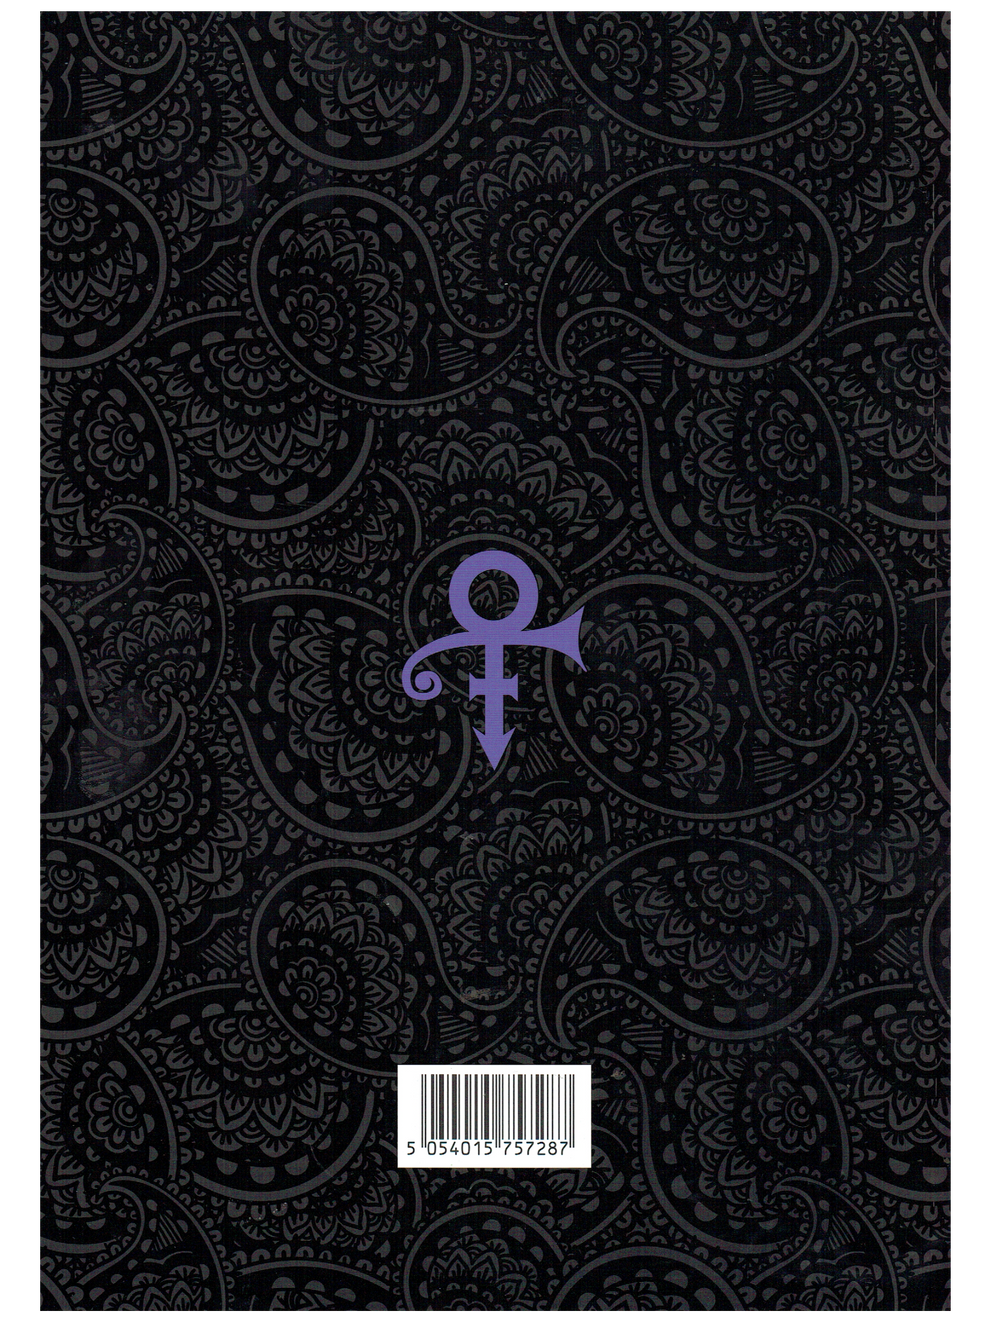 Prince – My Name Is Prince Official Exhibition Souvenir Programme As New SUPERB